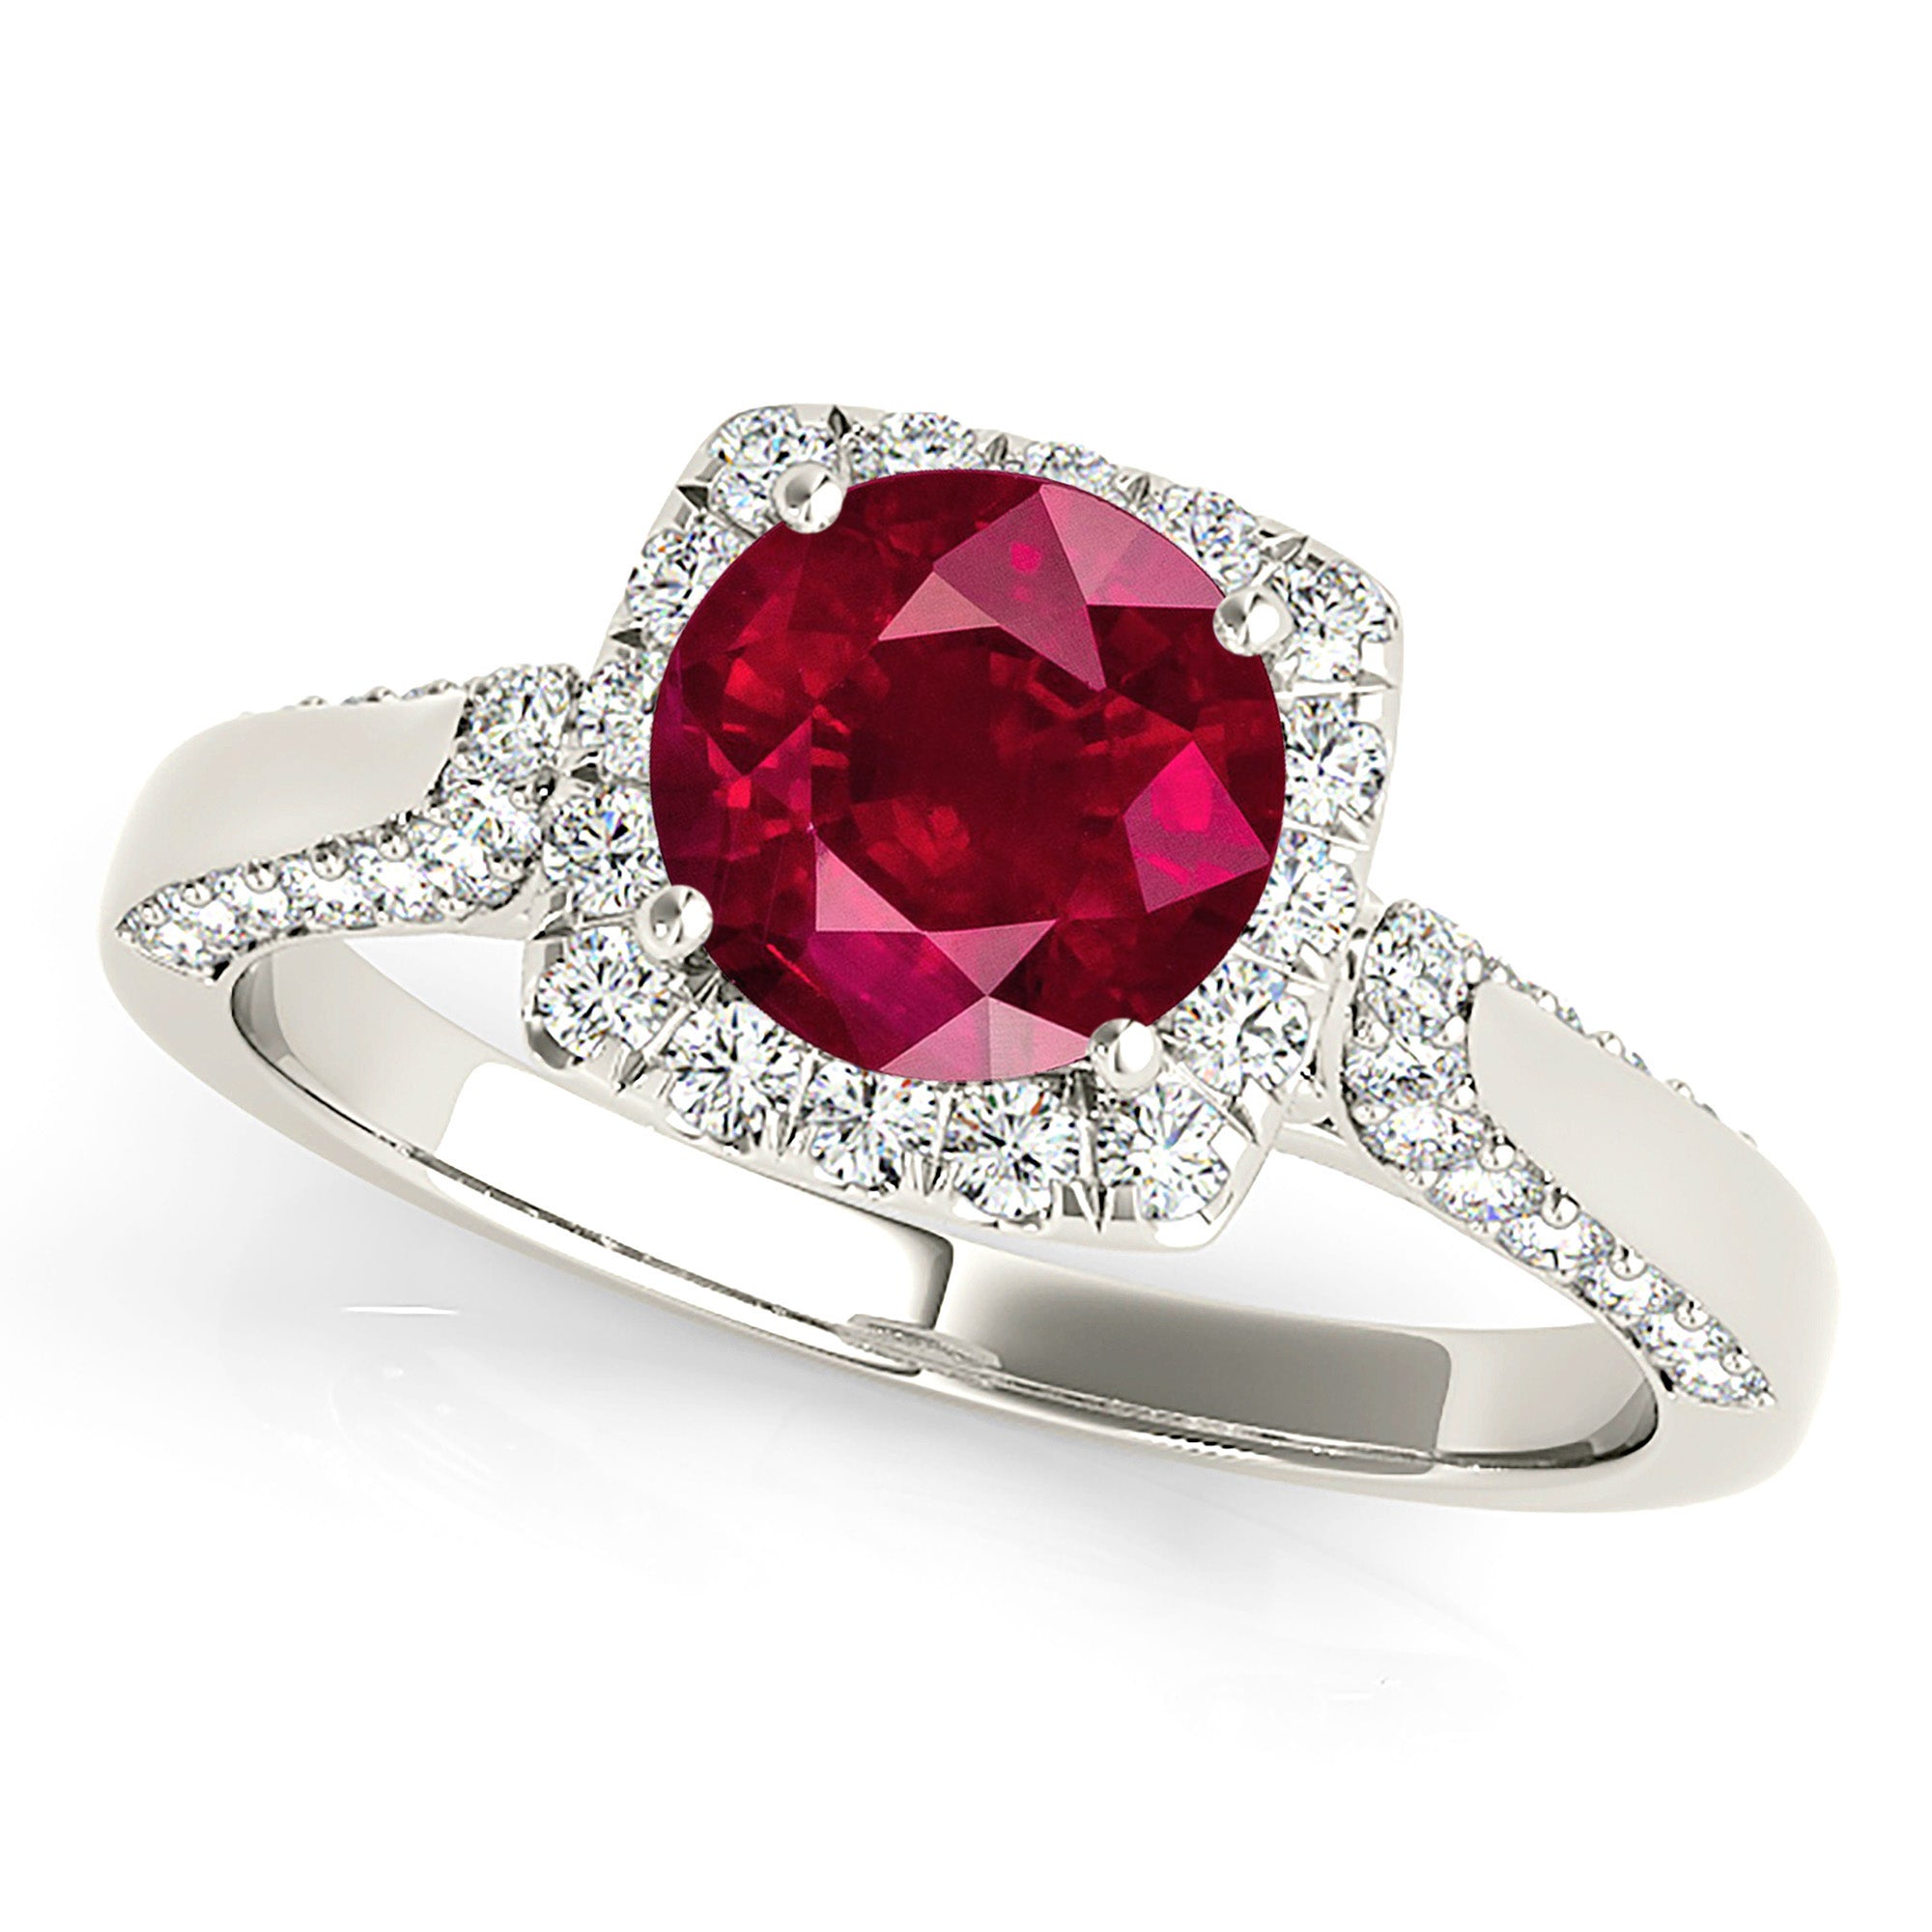 1.79 ct. Genuine Ruby Ring With 0.55 ctw. Diamond Halo And Side accent Side Diamonds, Fancy Bridge-in 14K/18K White, Yellow, Rose Gold and Platinum - Christmas Jewelry Gift -VIRABYANI